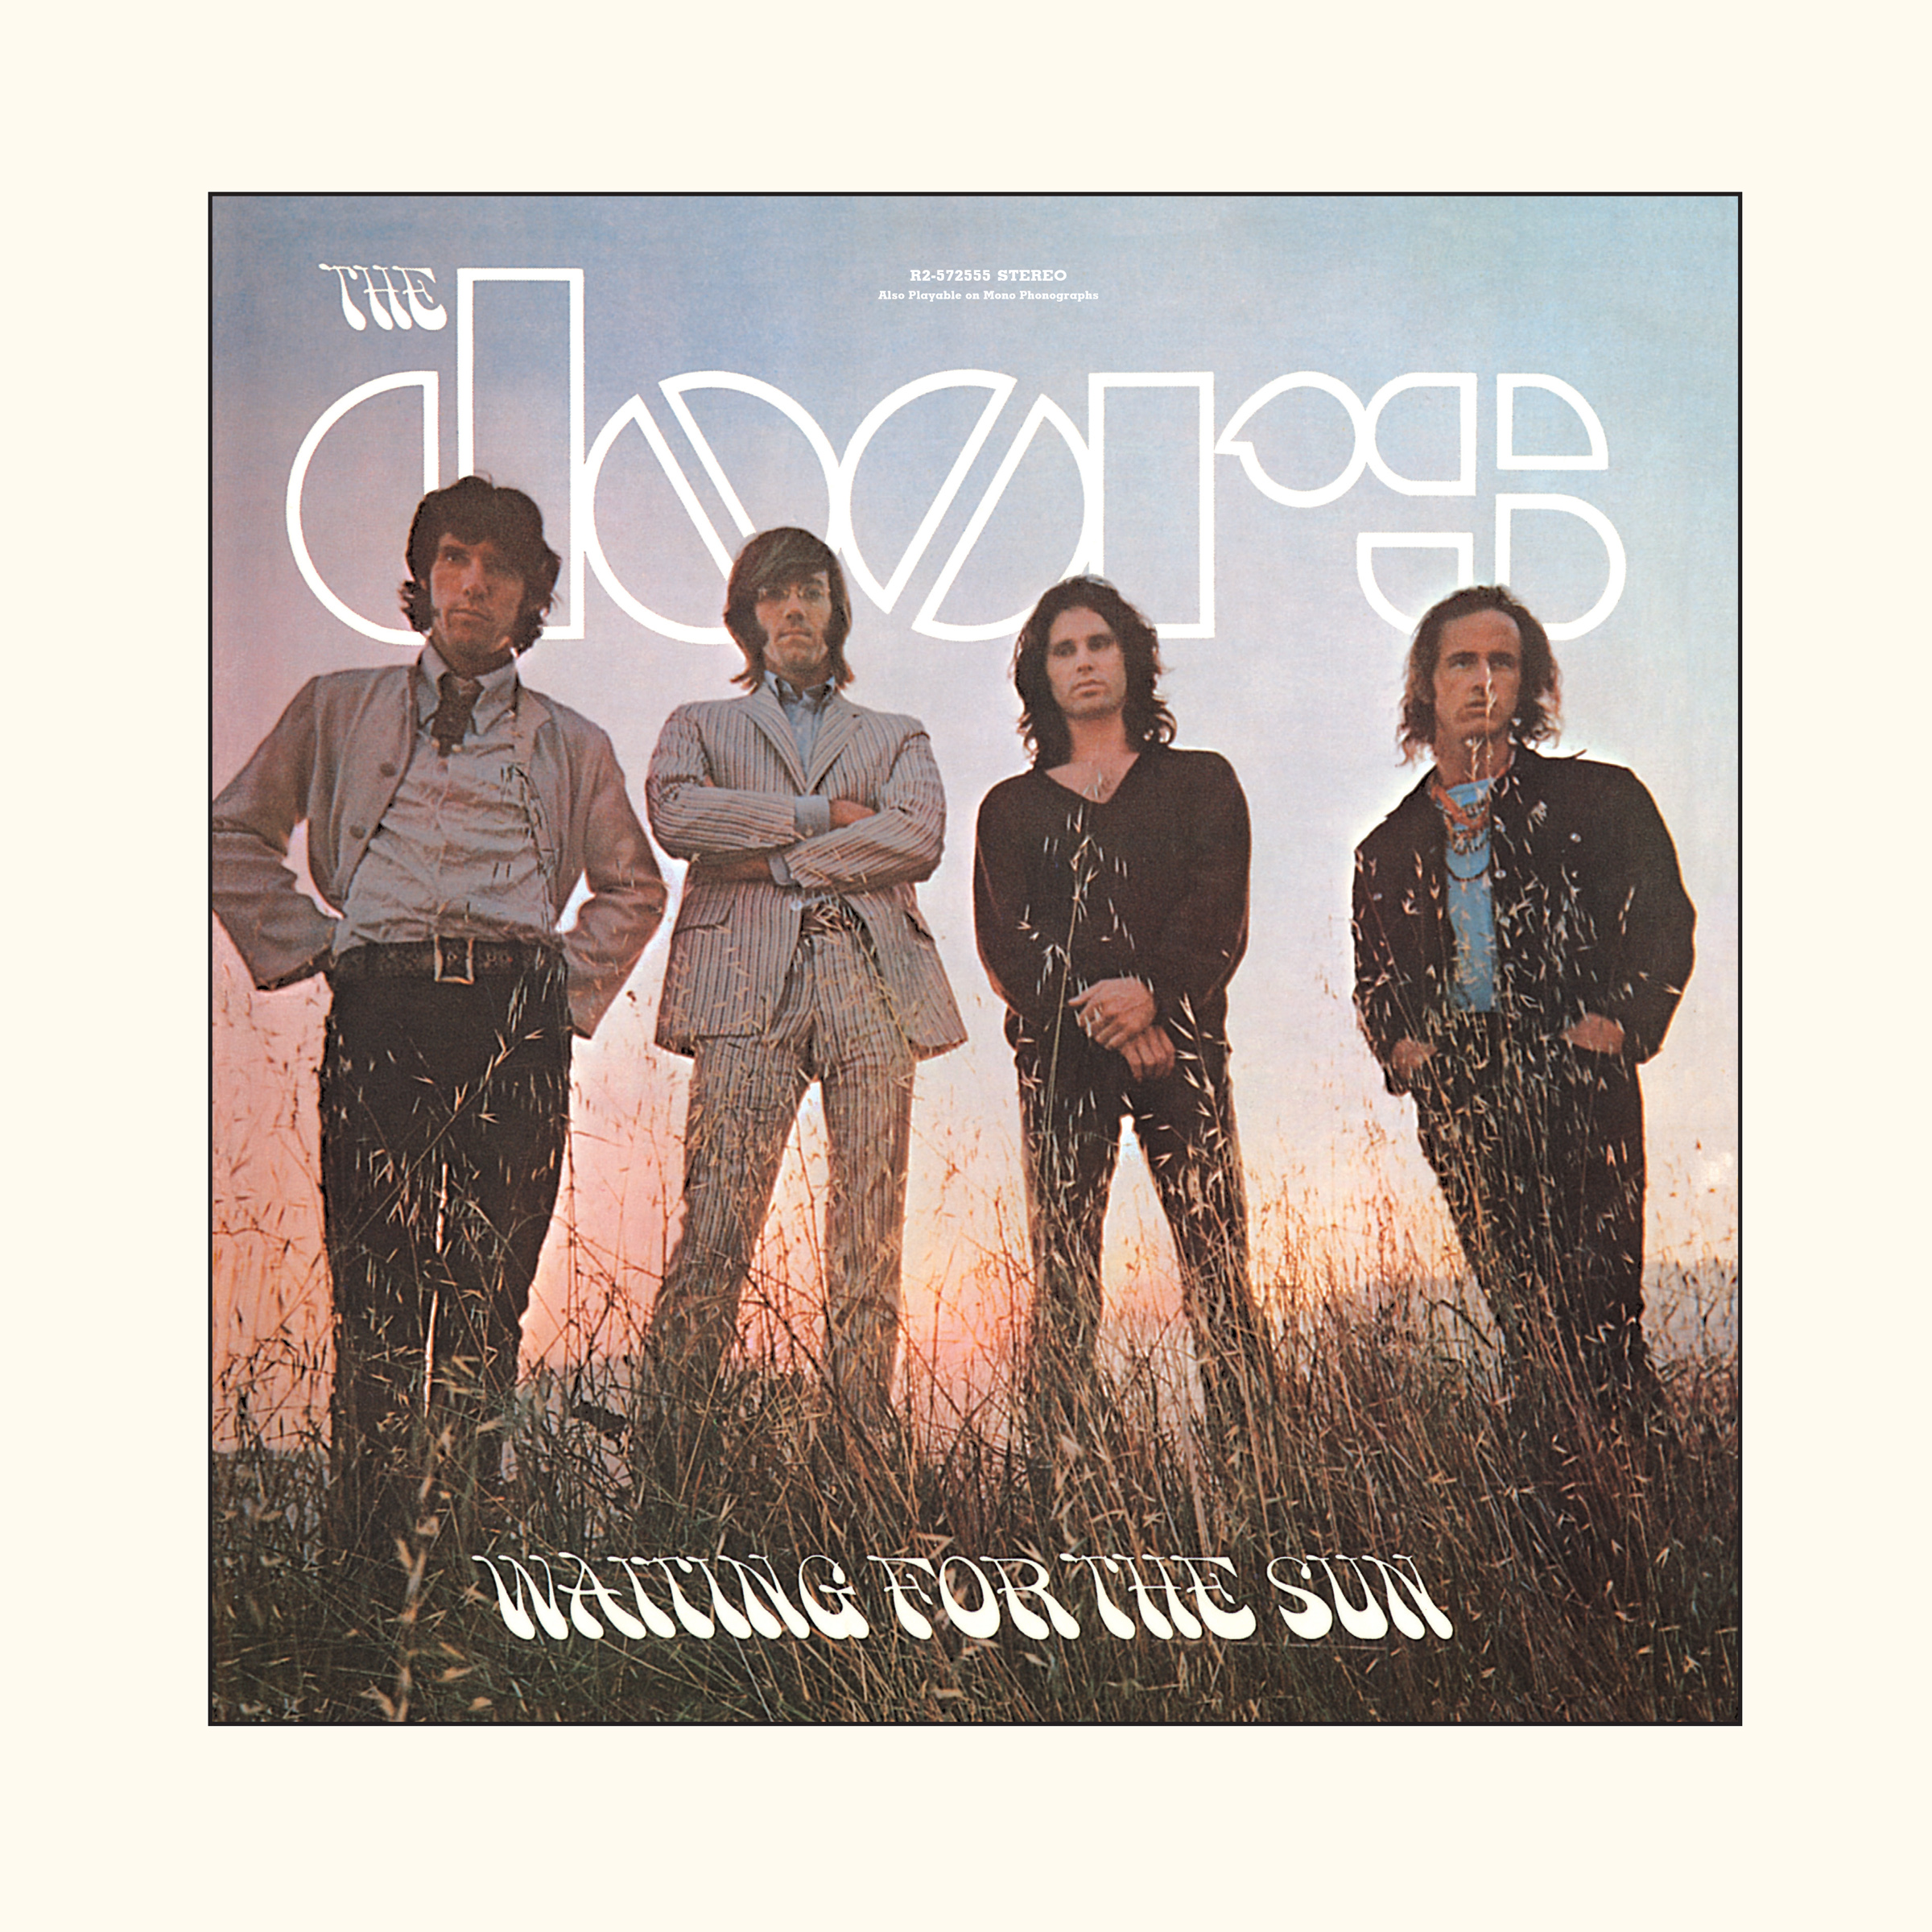 The Doors – Waiting for the Sun (50th Anniversary Deluxe Edition)